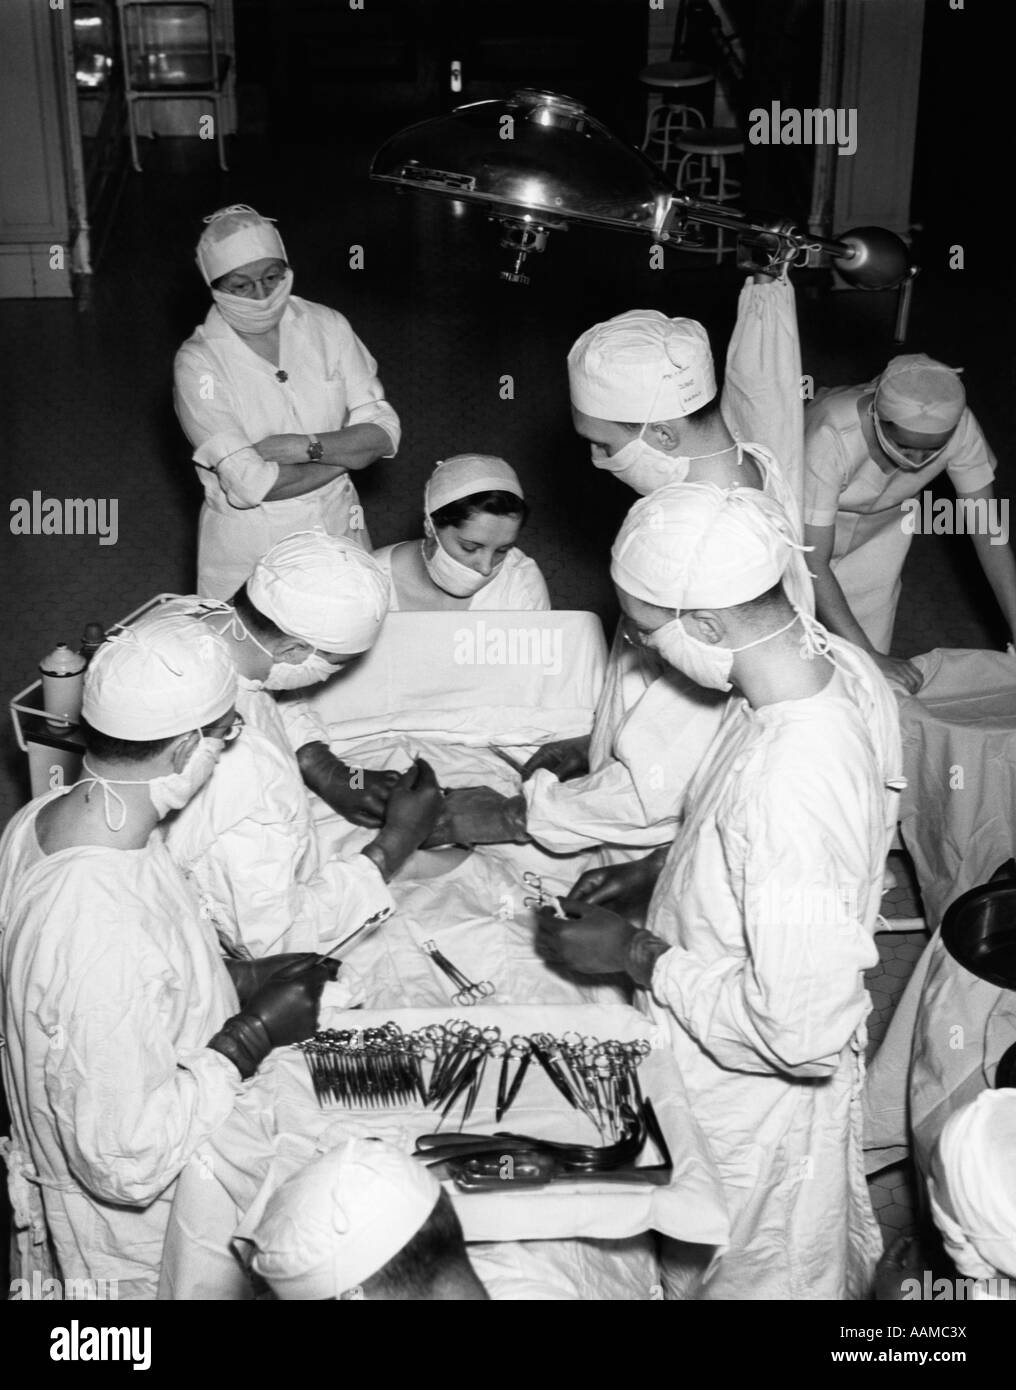 1930s SURGERY TEAM WEARING WHITE GOWNS CAPS AND MASKS IN HOSPITAL OPERATING ROOM PERFORMING A MEDICAL PROCEDURE Stock Photo